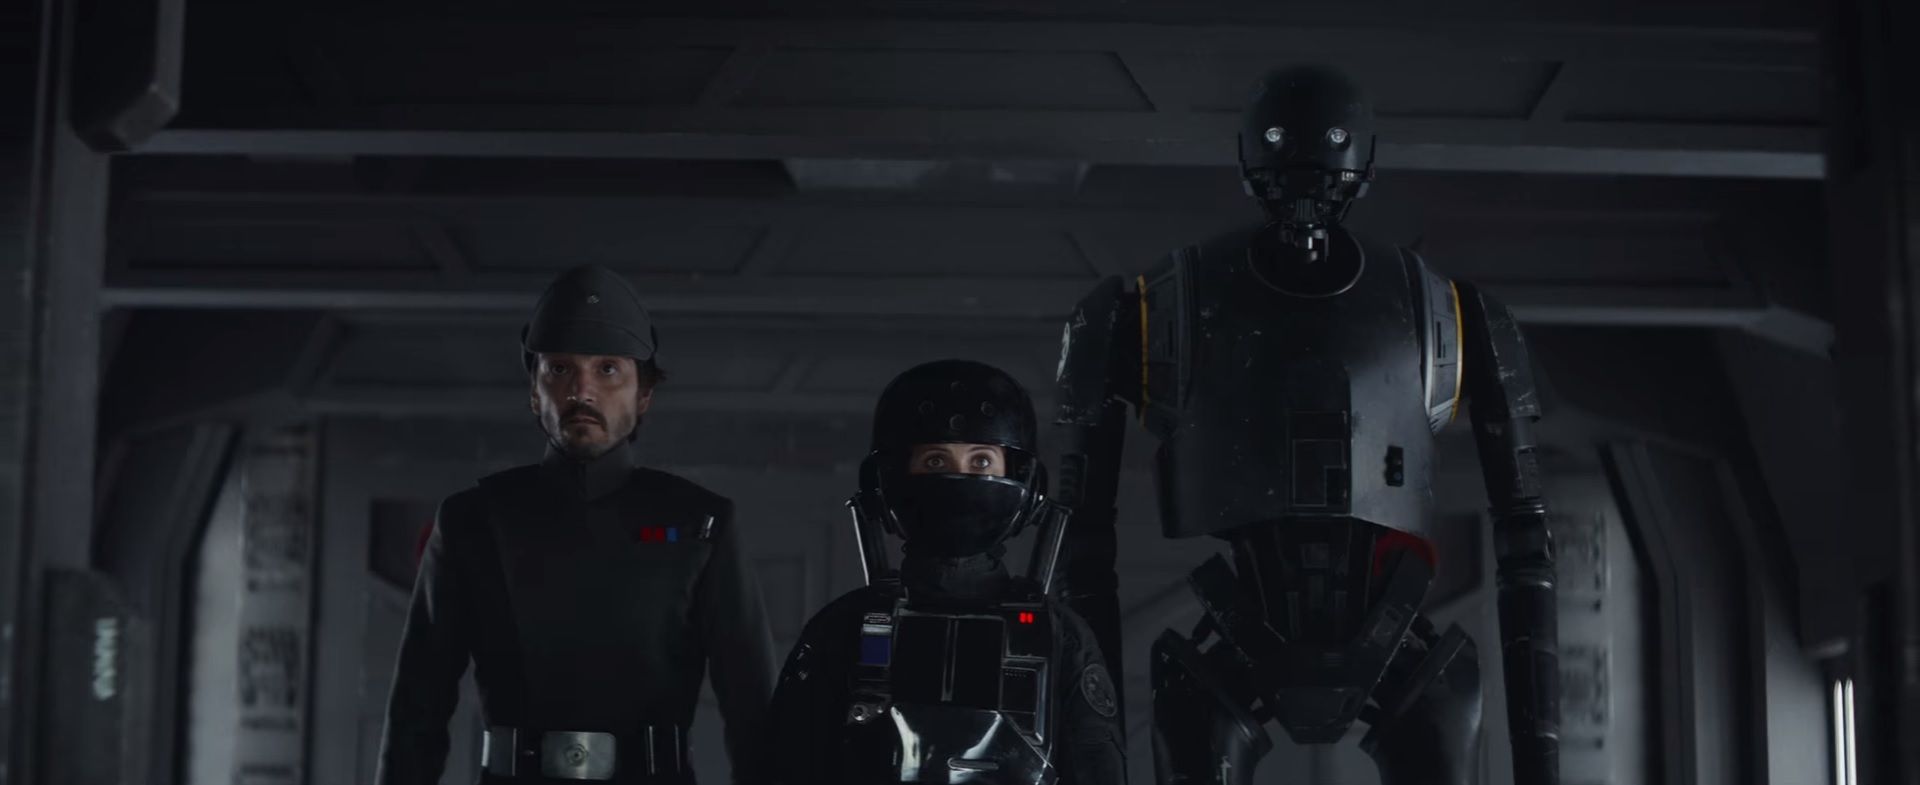 Rogue One A Star Wars Story Trailer 3 - Cassion and Jyn in disguise